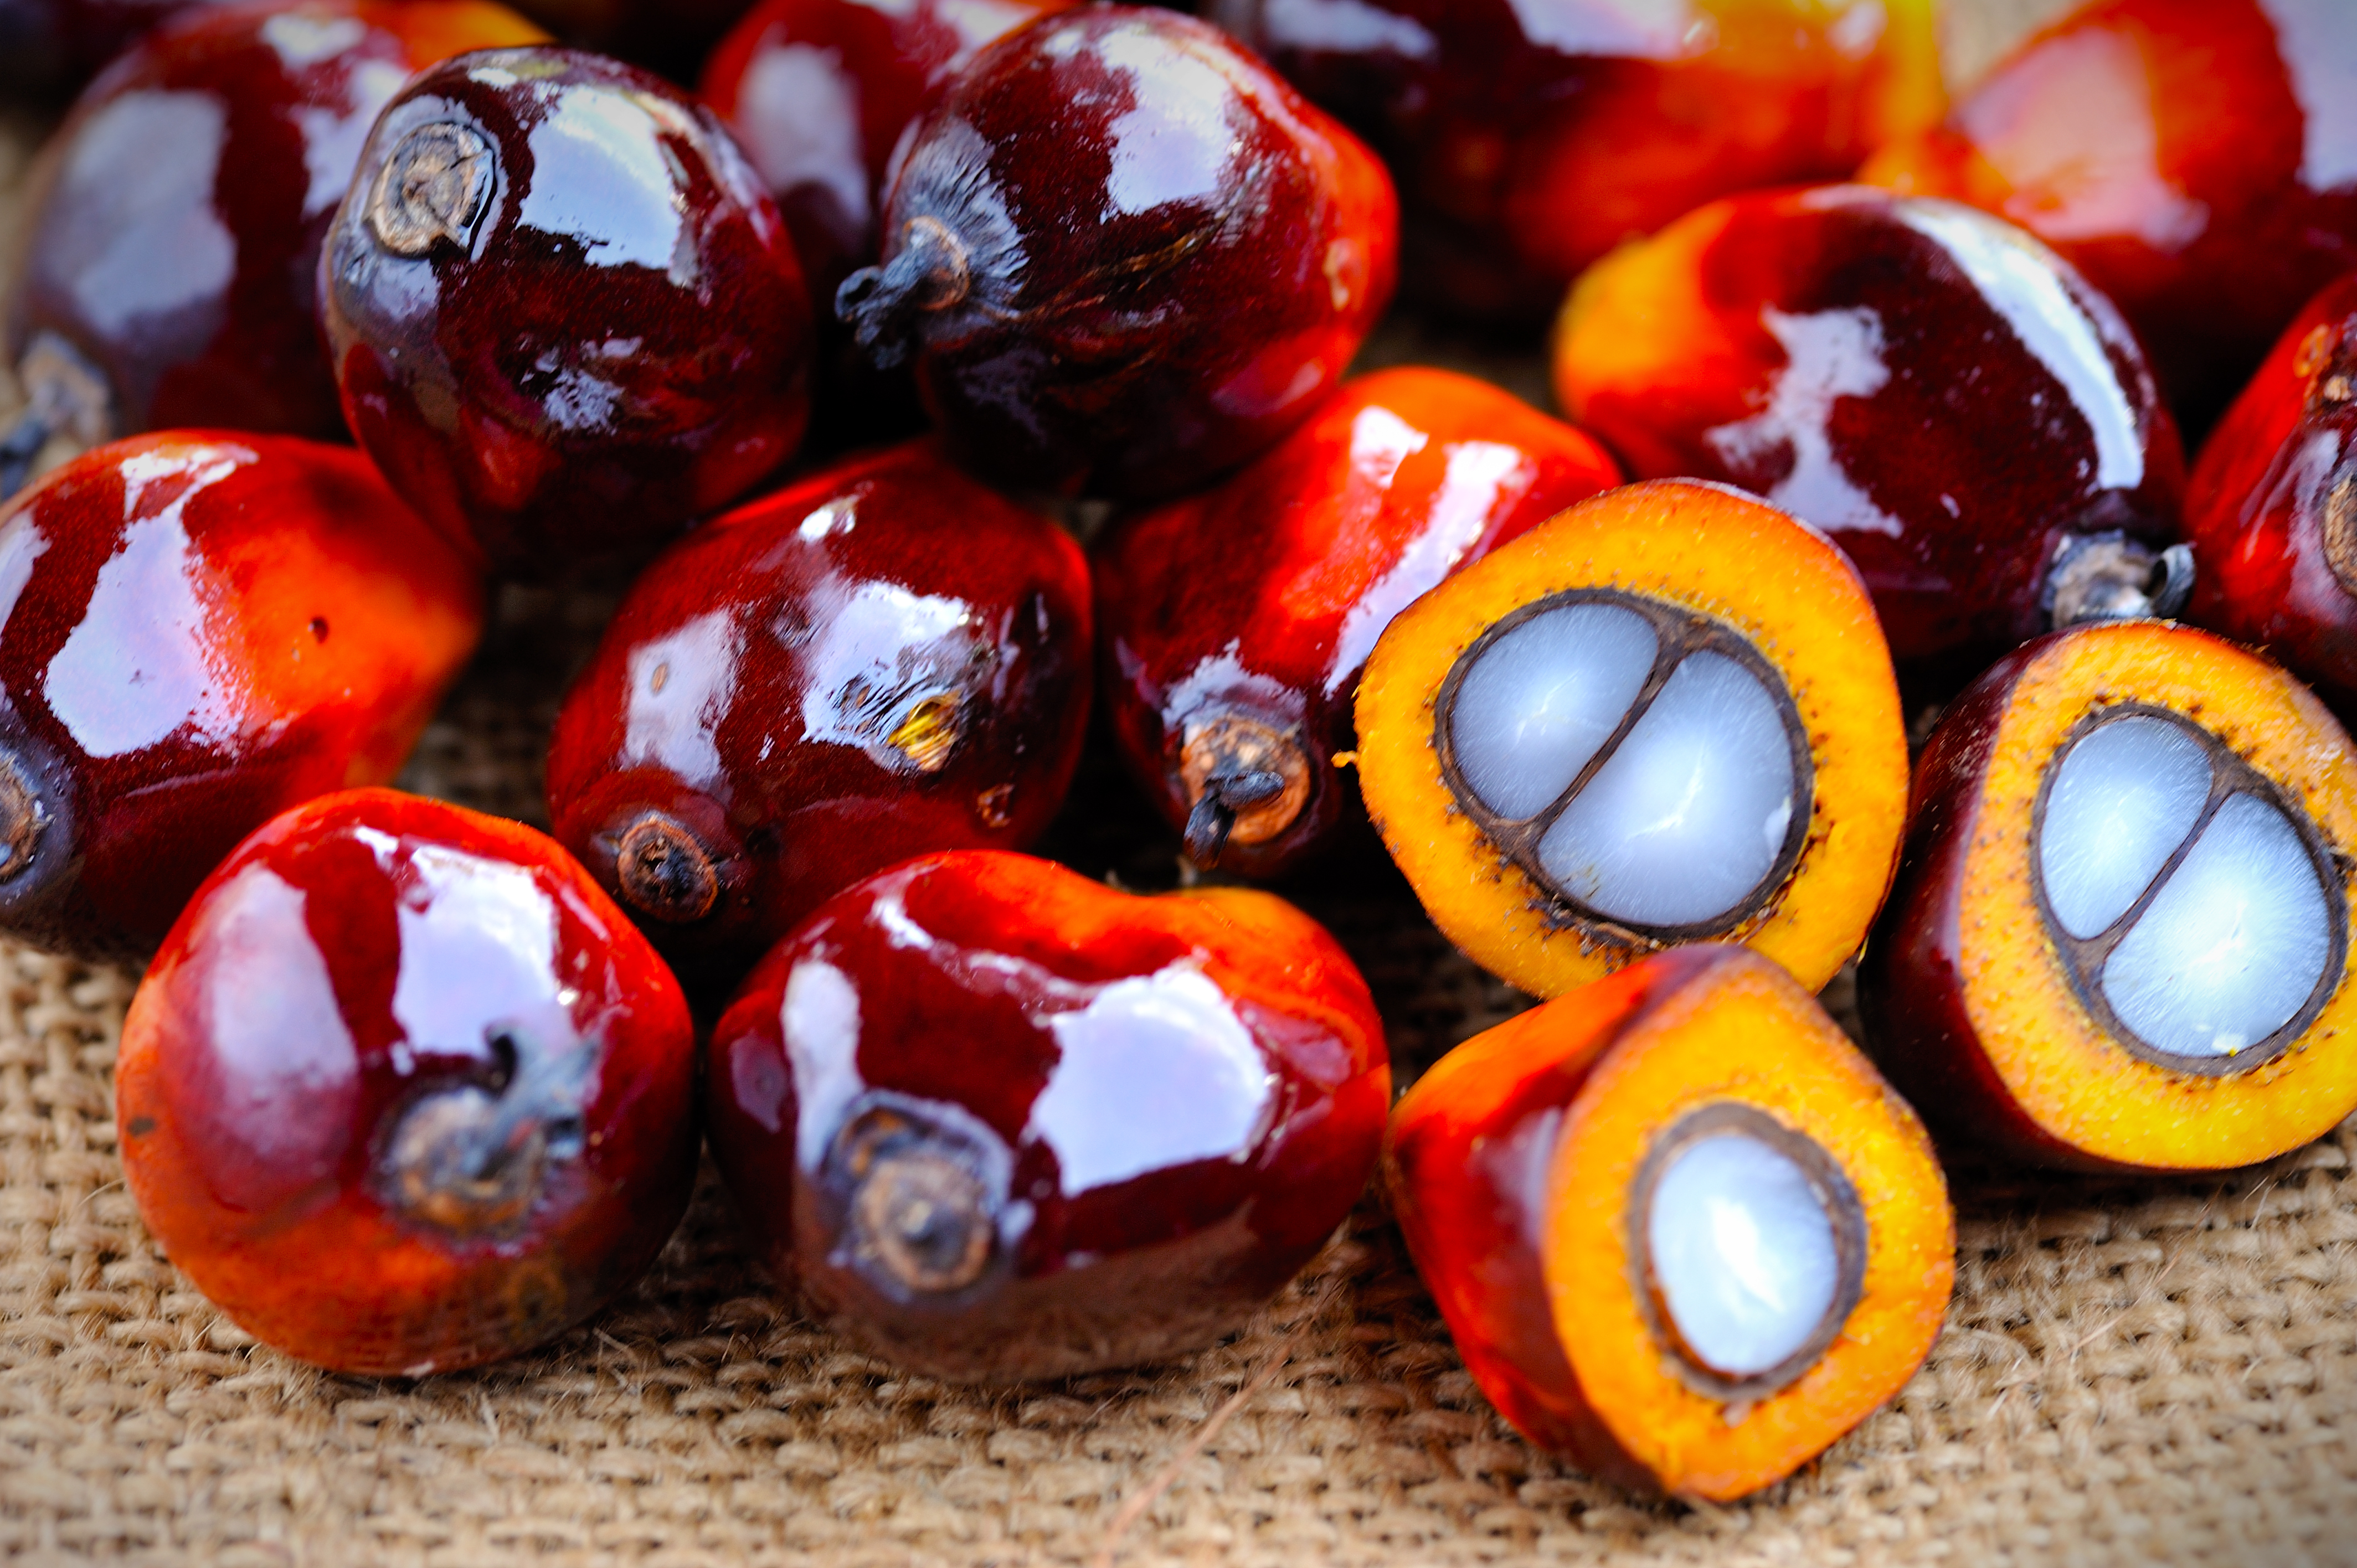 Health impacts of red palm oil, the lesser-known sister of refined